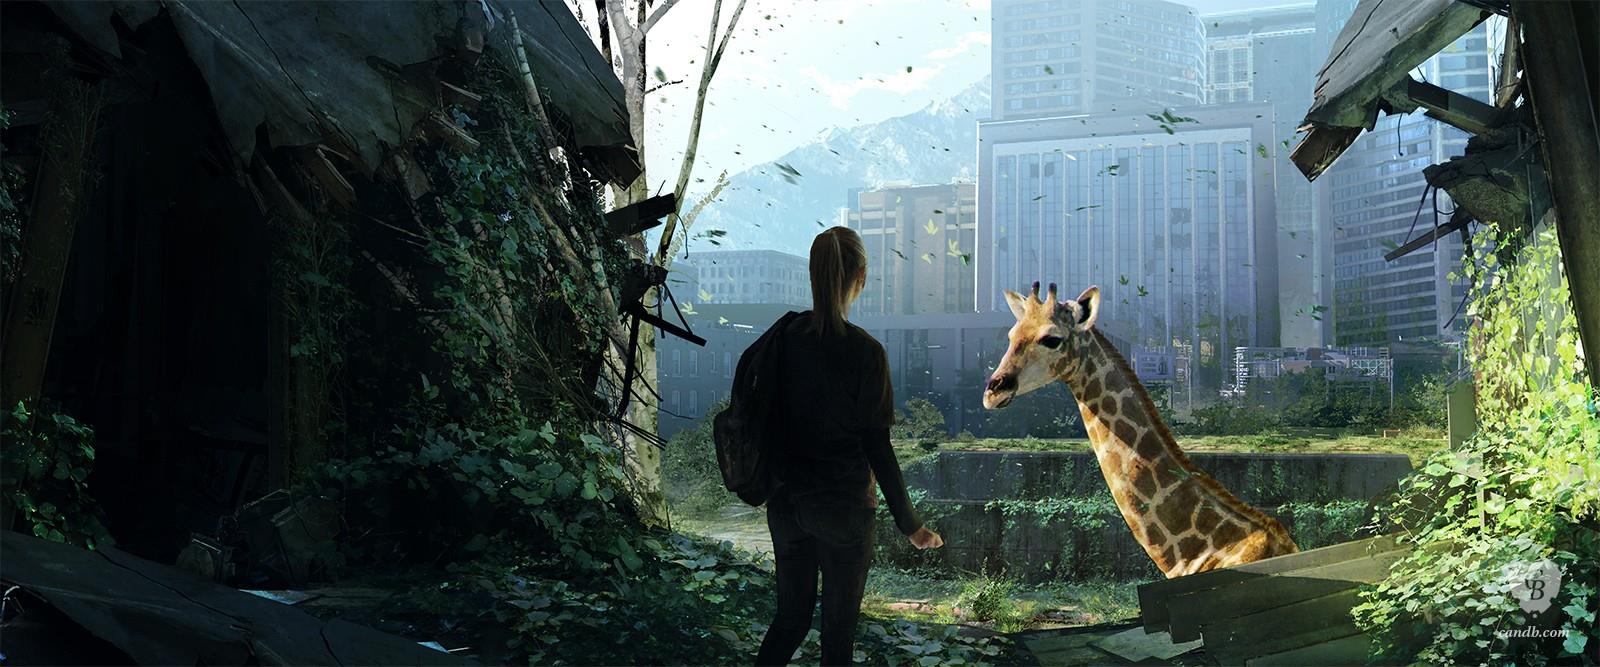 a-new-day-last-of-us-naughty-dog_1600x667_marked